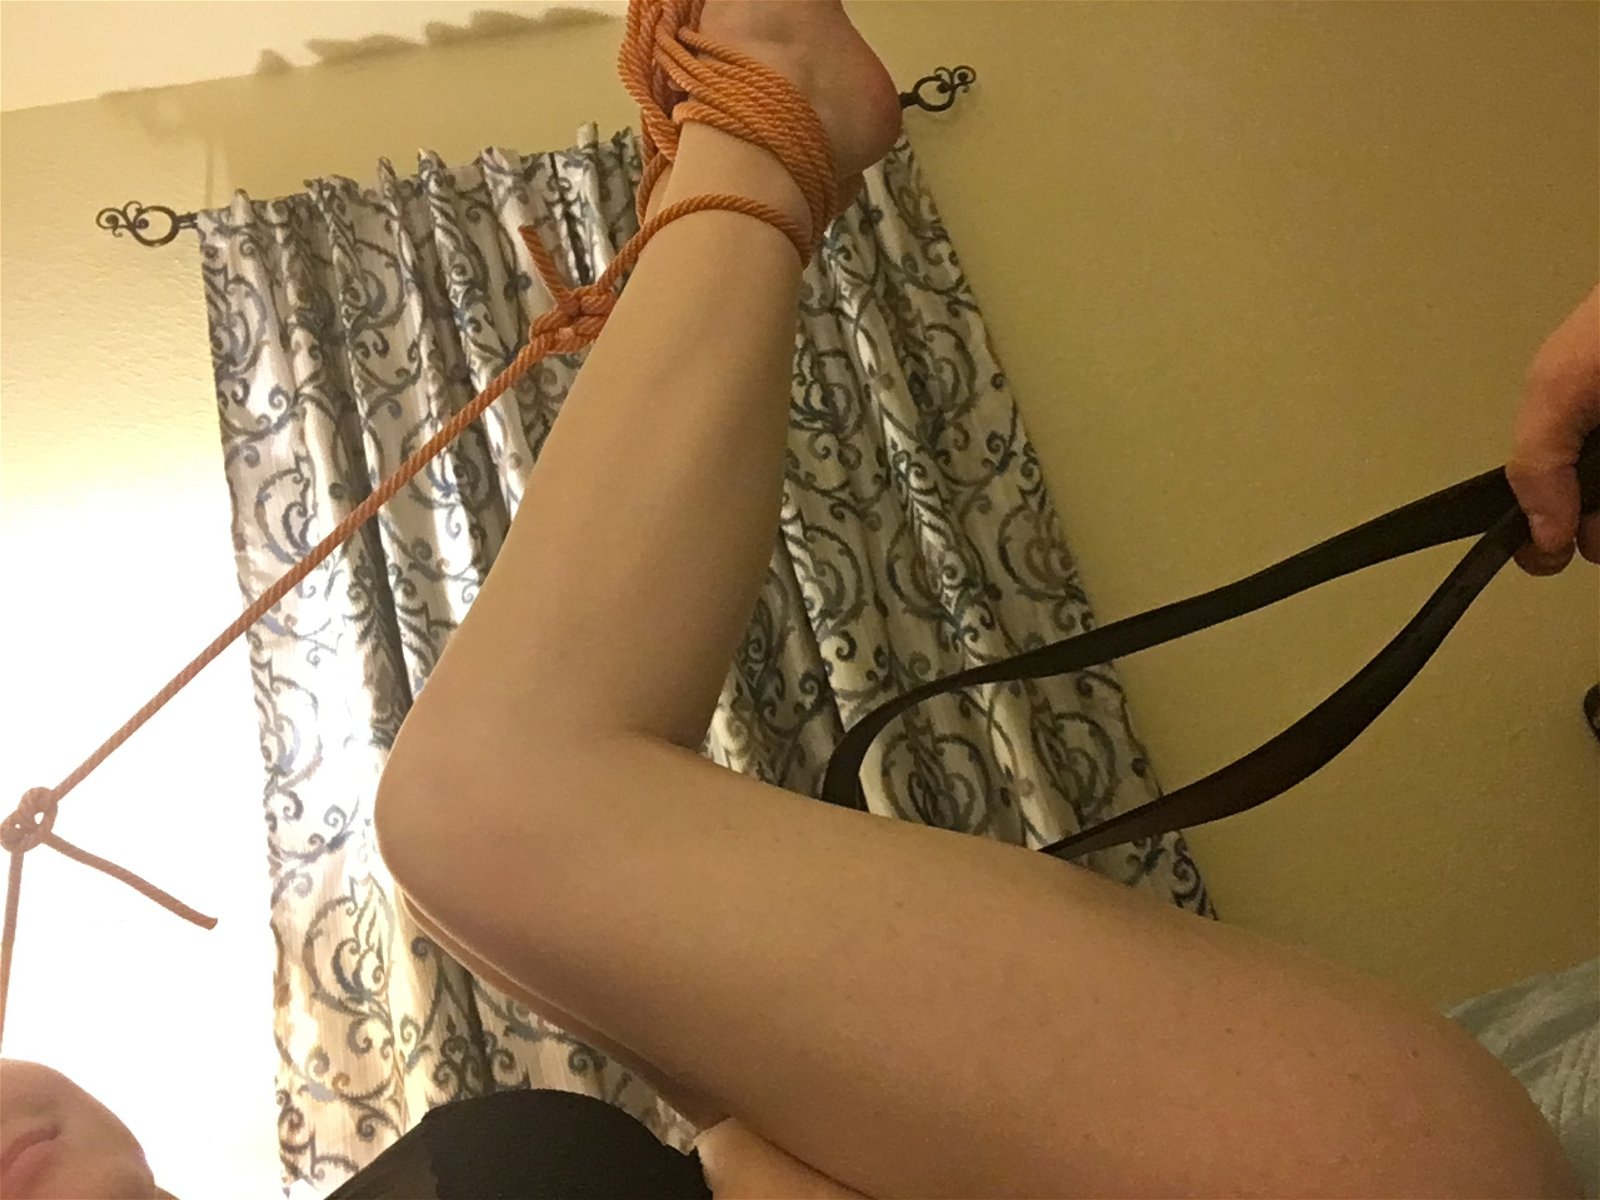 Photo by Mrs.Marston with the username @MrsMarston, who is a verified user,  December 31, 2019 at 1:45 AM. The post is about the topic Bondage and the text says 'All tied up... #belt #ropeplay #submissive #goodgirl #Sir'